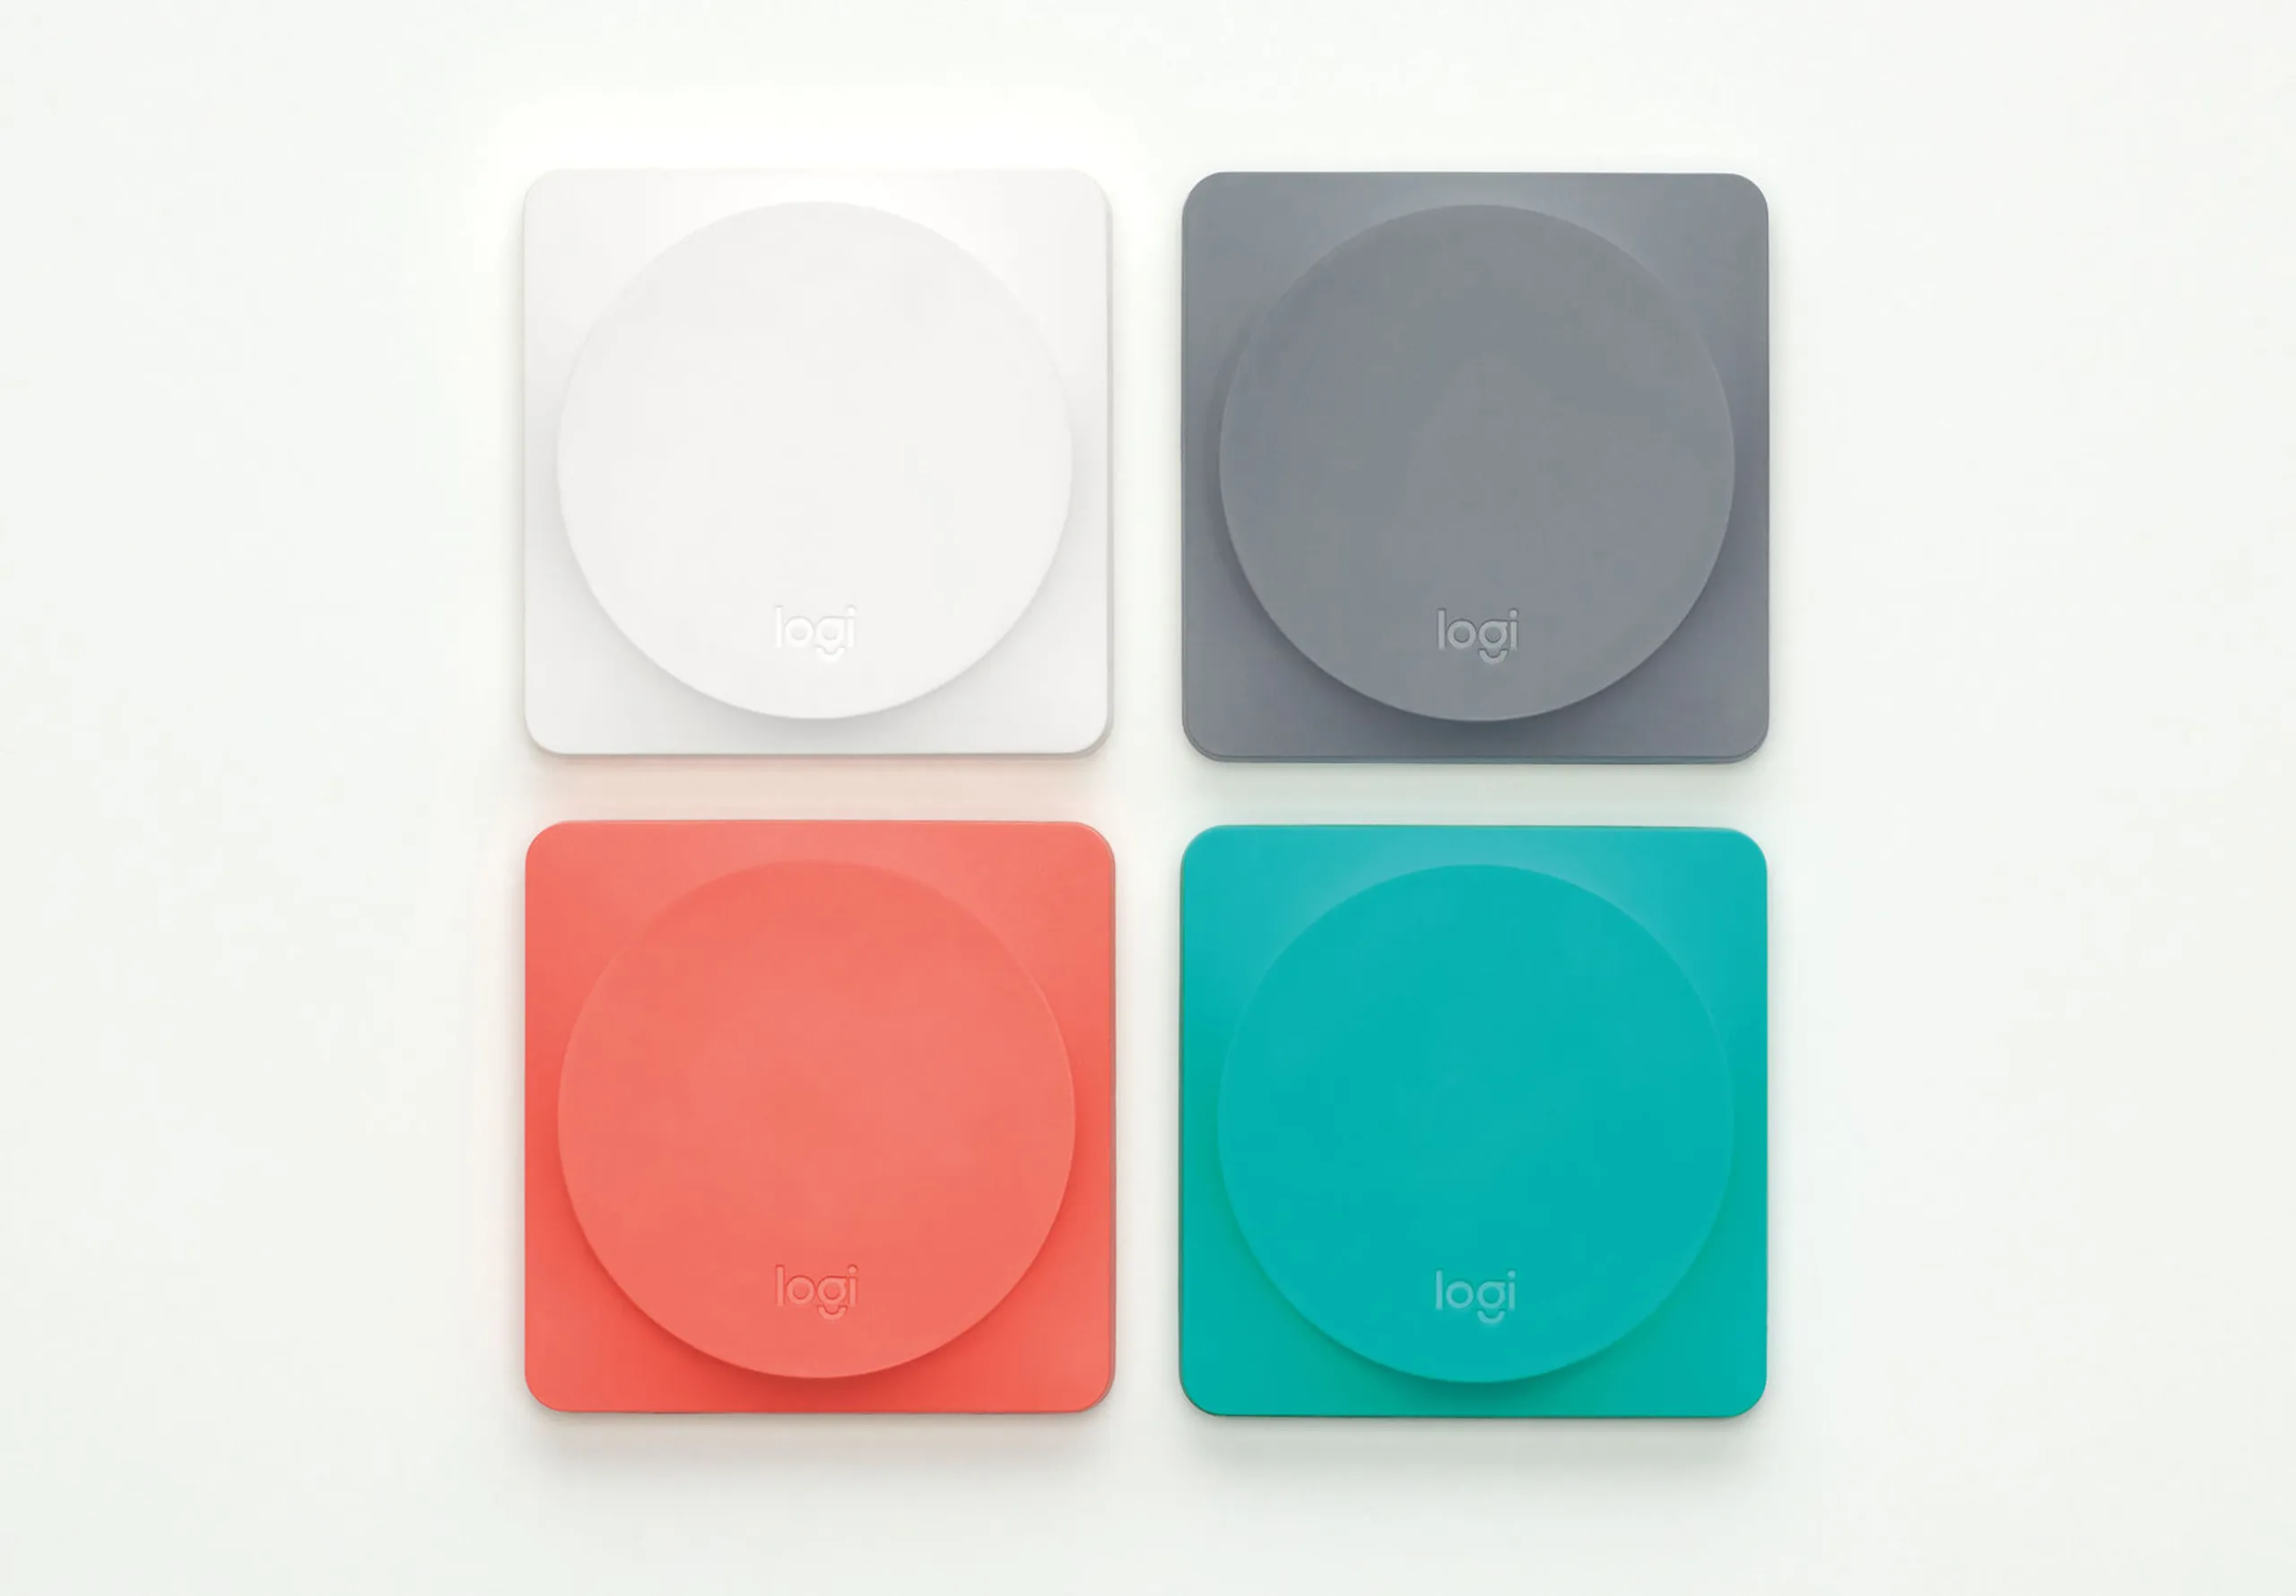 Four Logi Pop devices in different colourways featured by Rodd